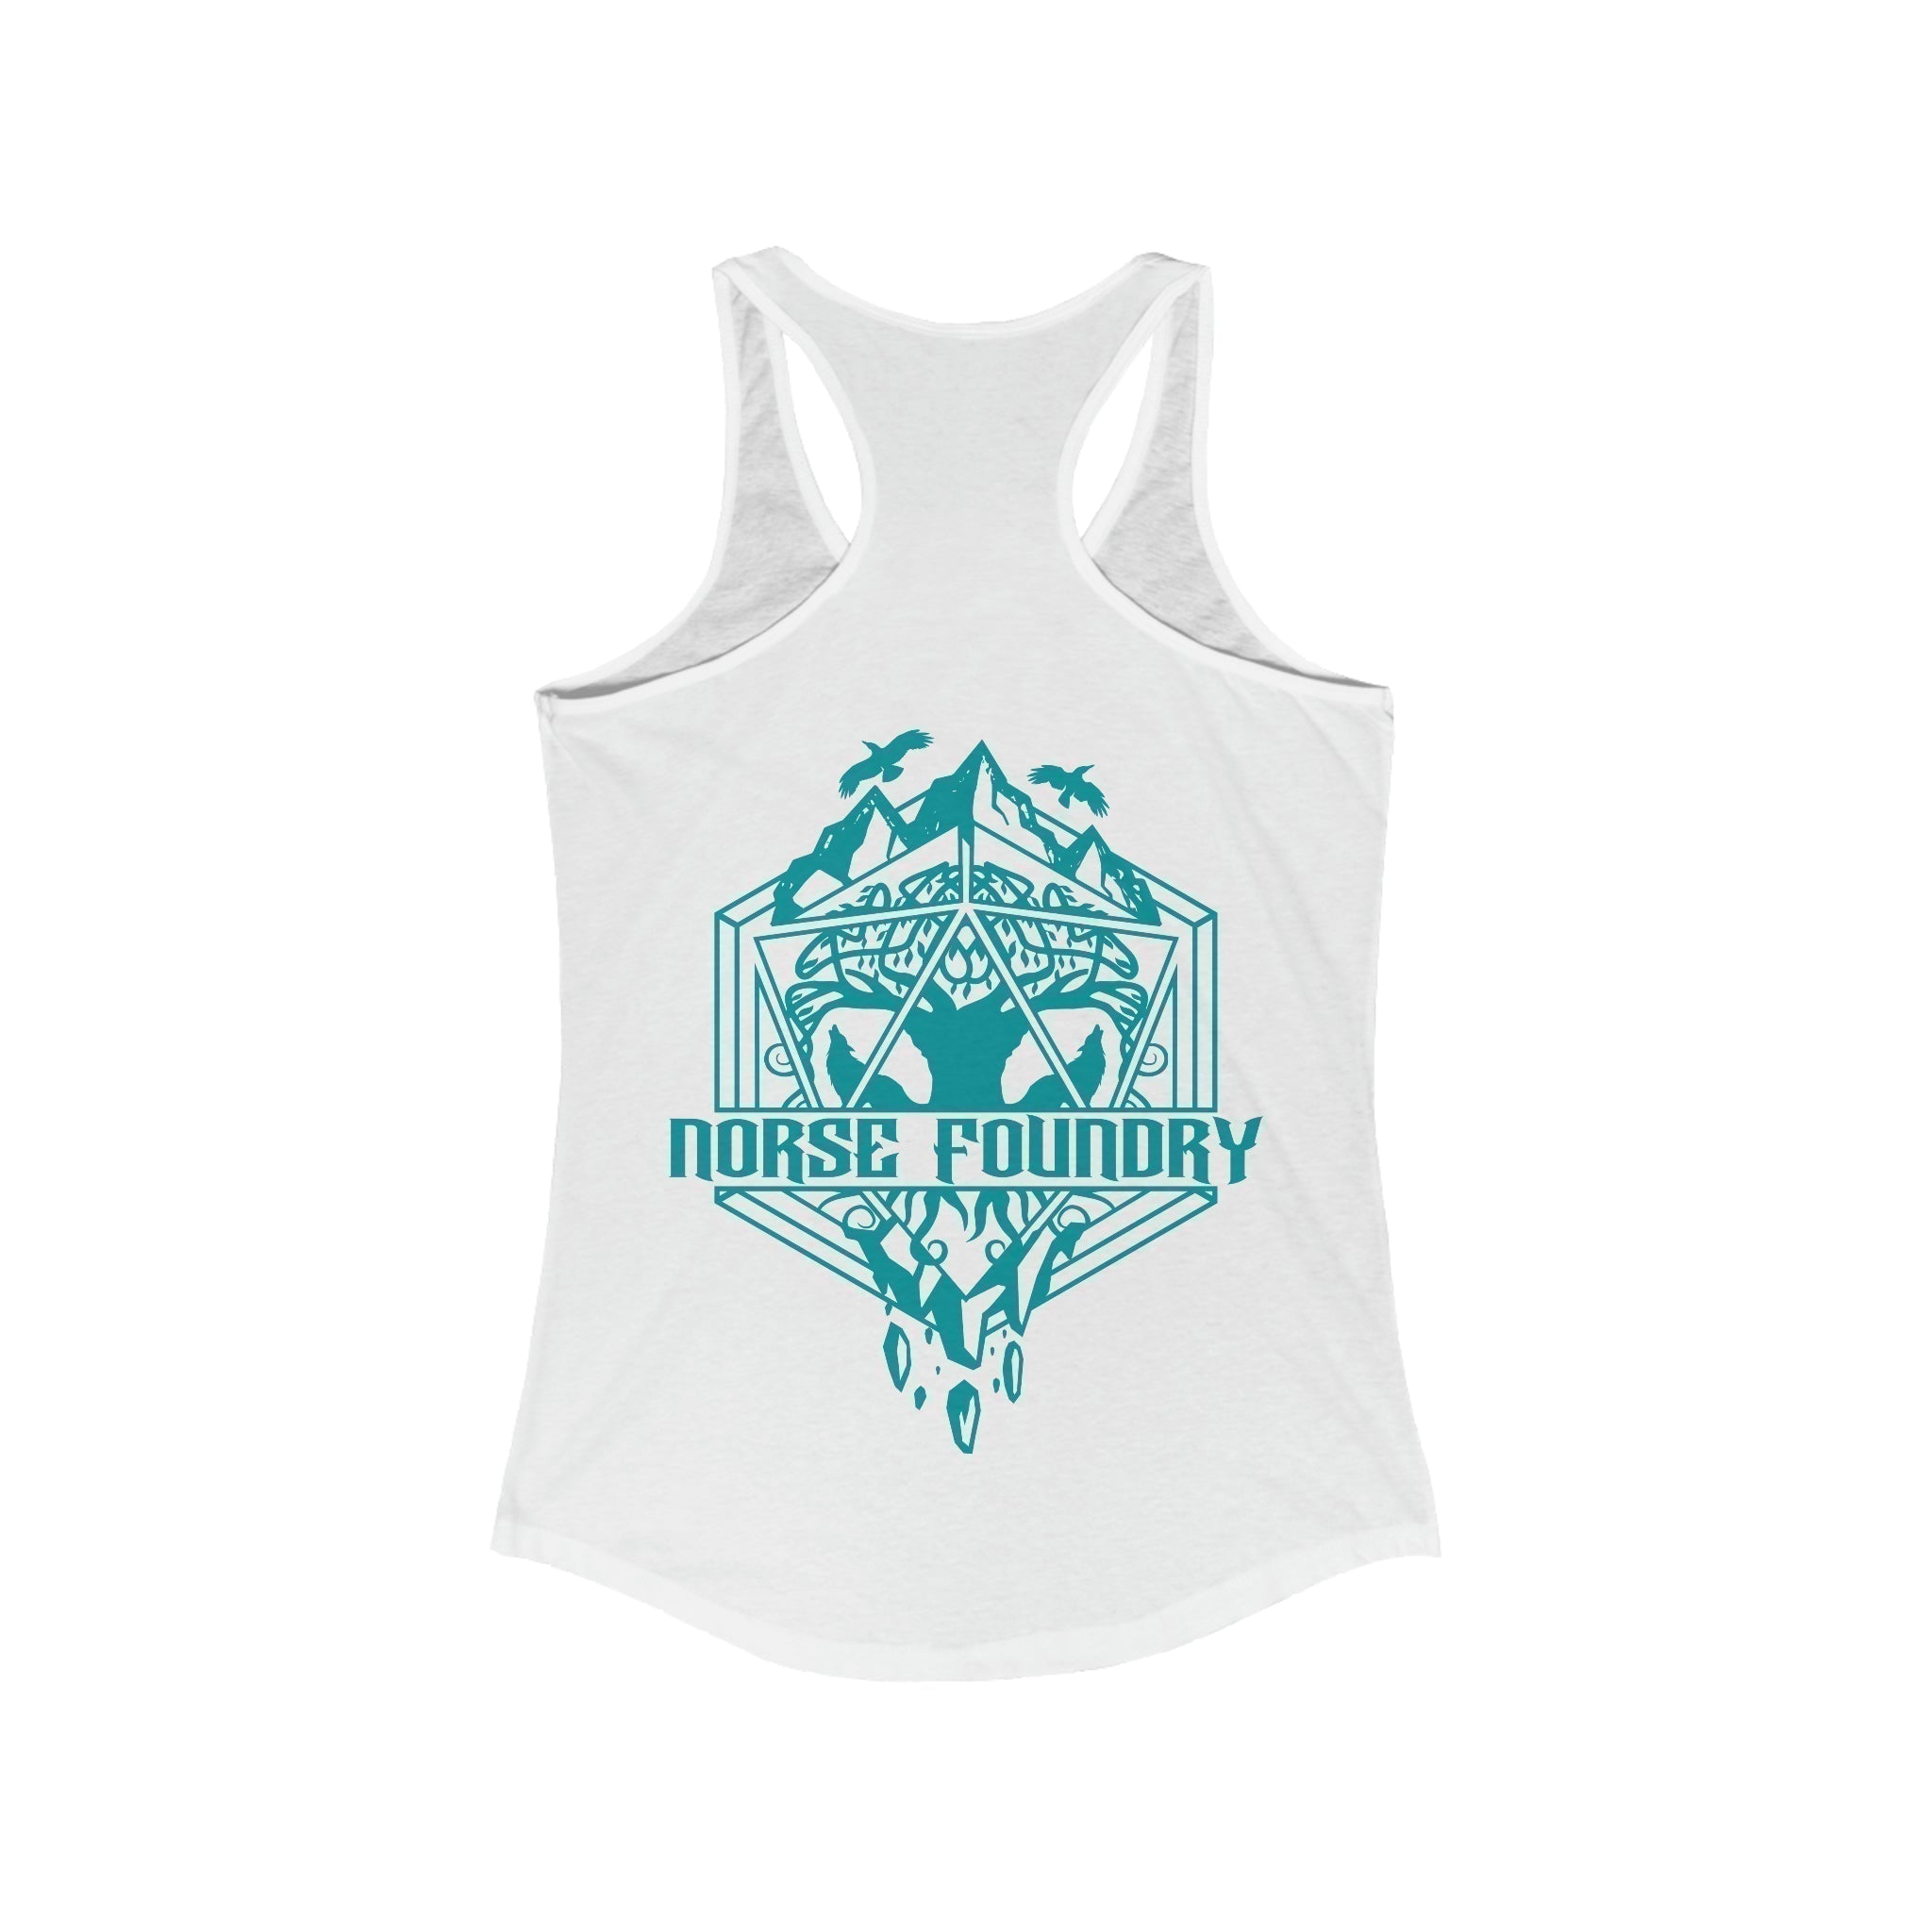 Roll for Adventure - Norse Foundry Women's Tank Top - 22677692819011436304